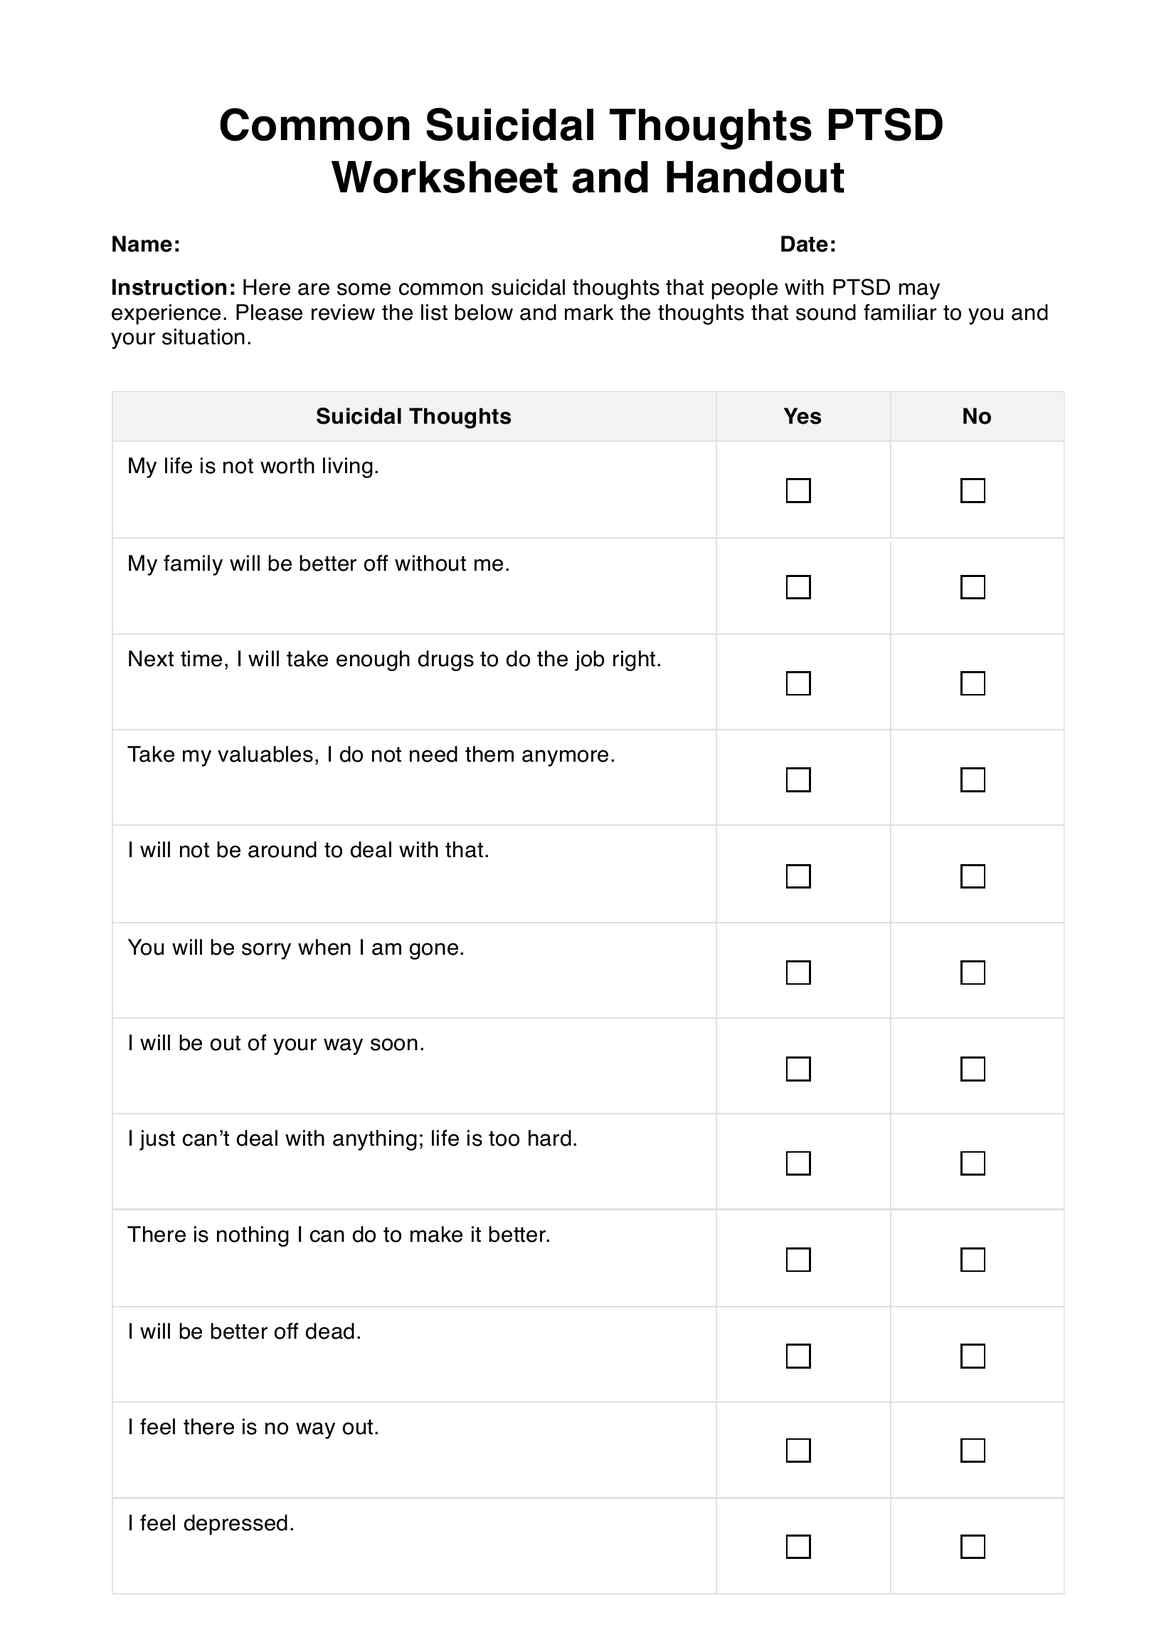 Common Suicidal Thoughts PTSD Worksheet and Handout PDF Example